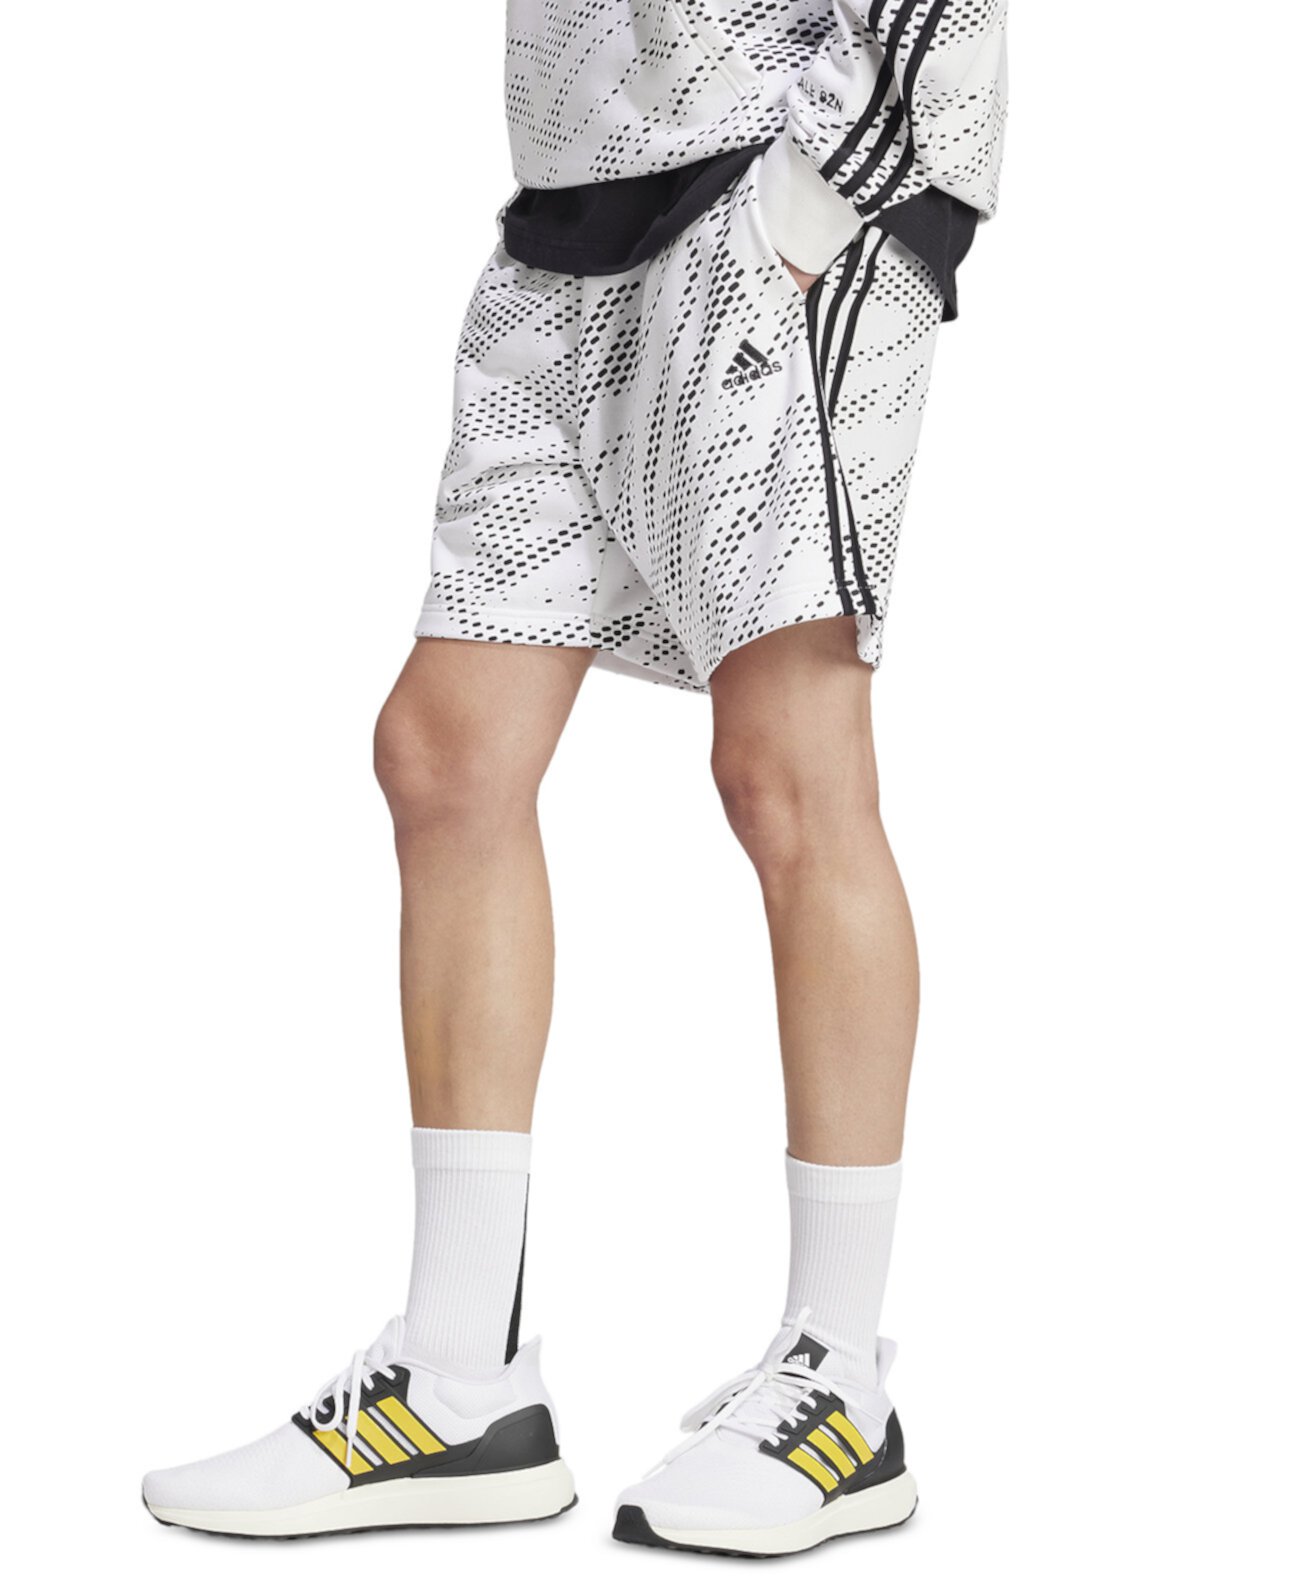 Men's All SZN Snack Attack French Terry 7" Shorts Adidas